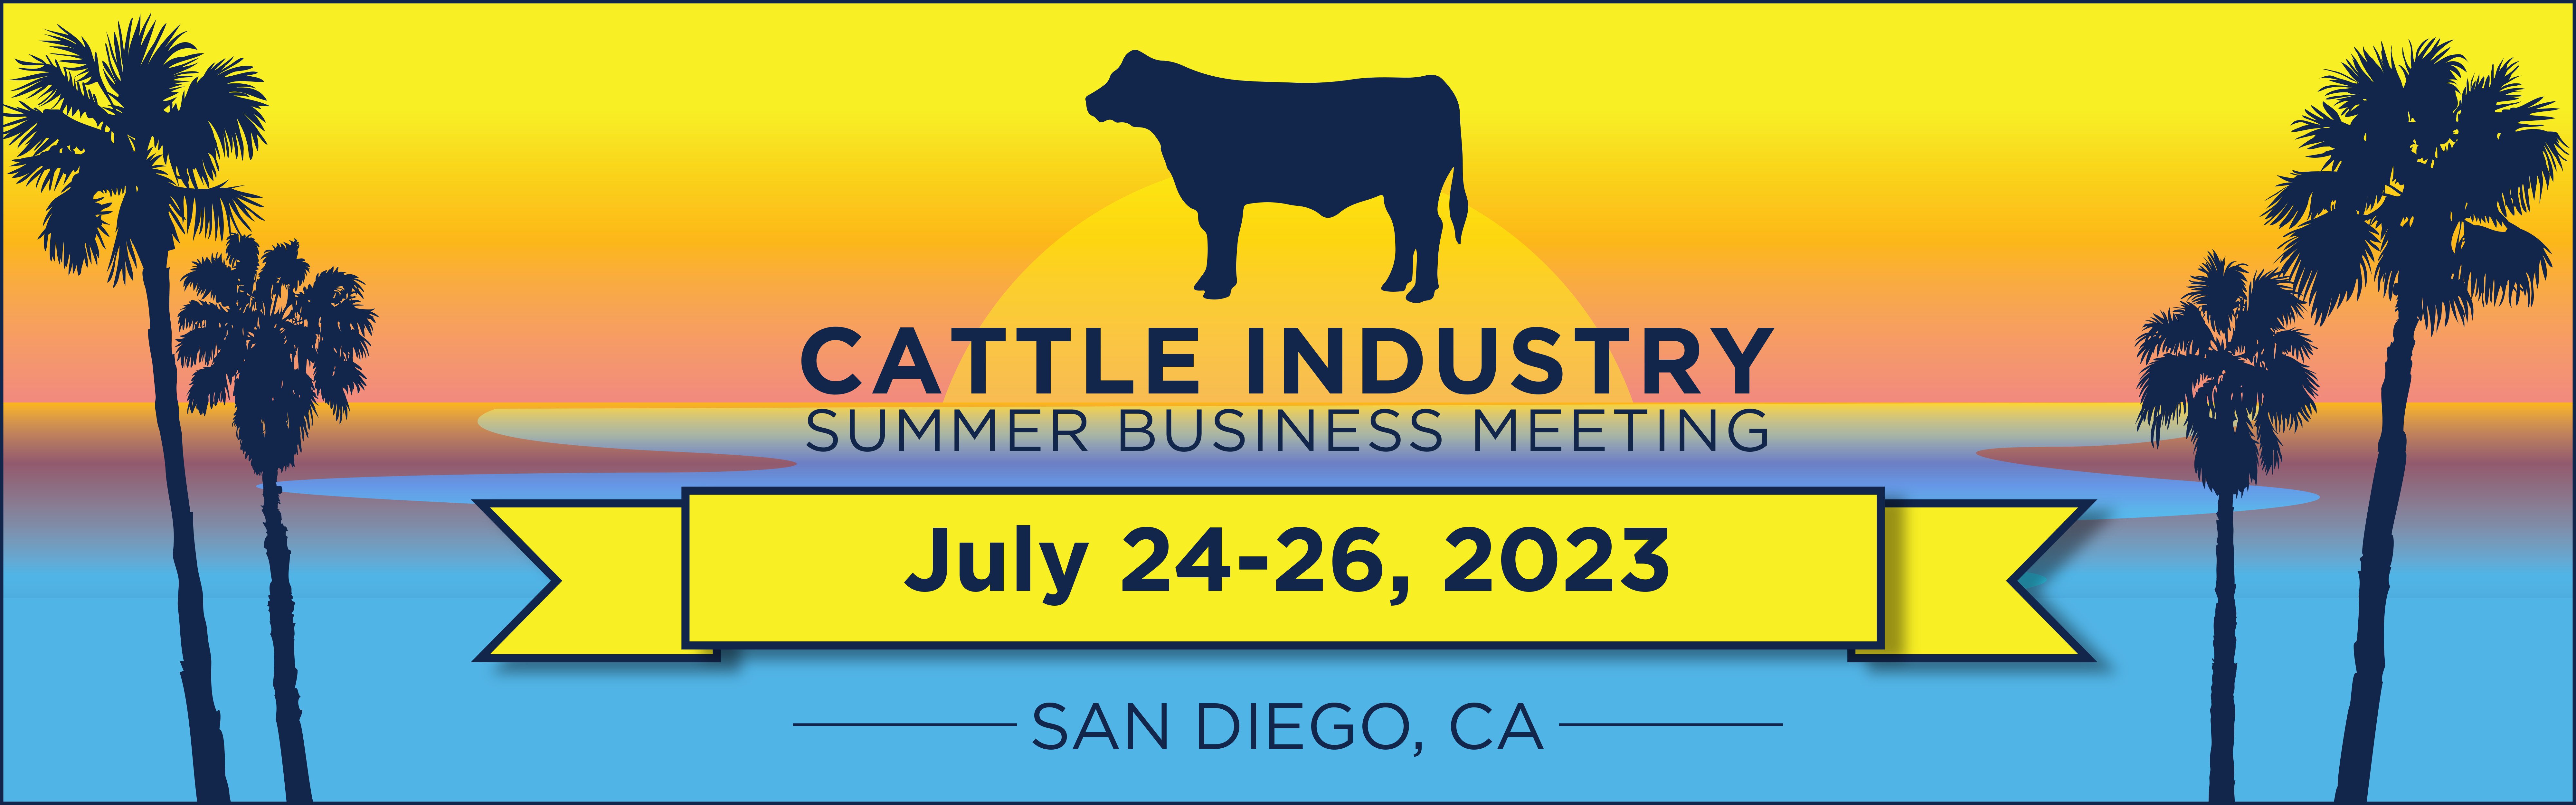 Cattle Industry Business Meeting 2023 Banner